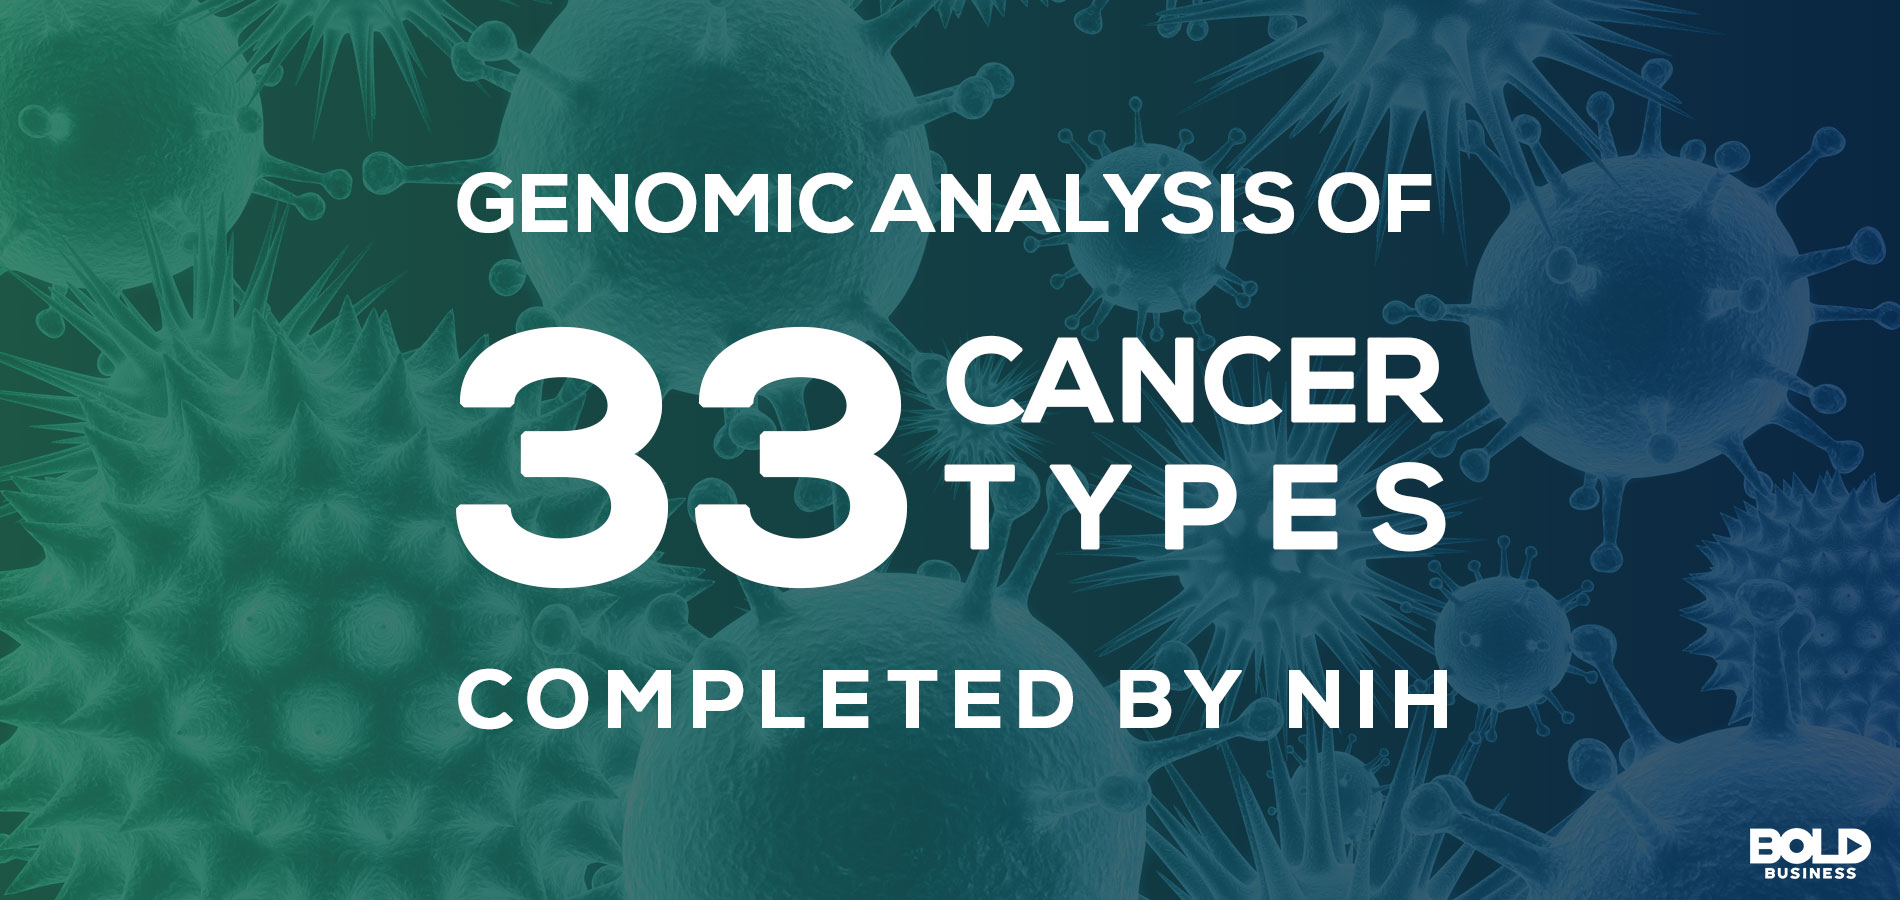 background image of gene mutations, text overlay that reads "Genomic Analysis of 22 Cancer Types Completed by NIH"